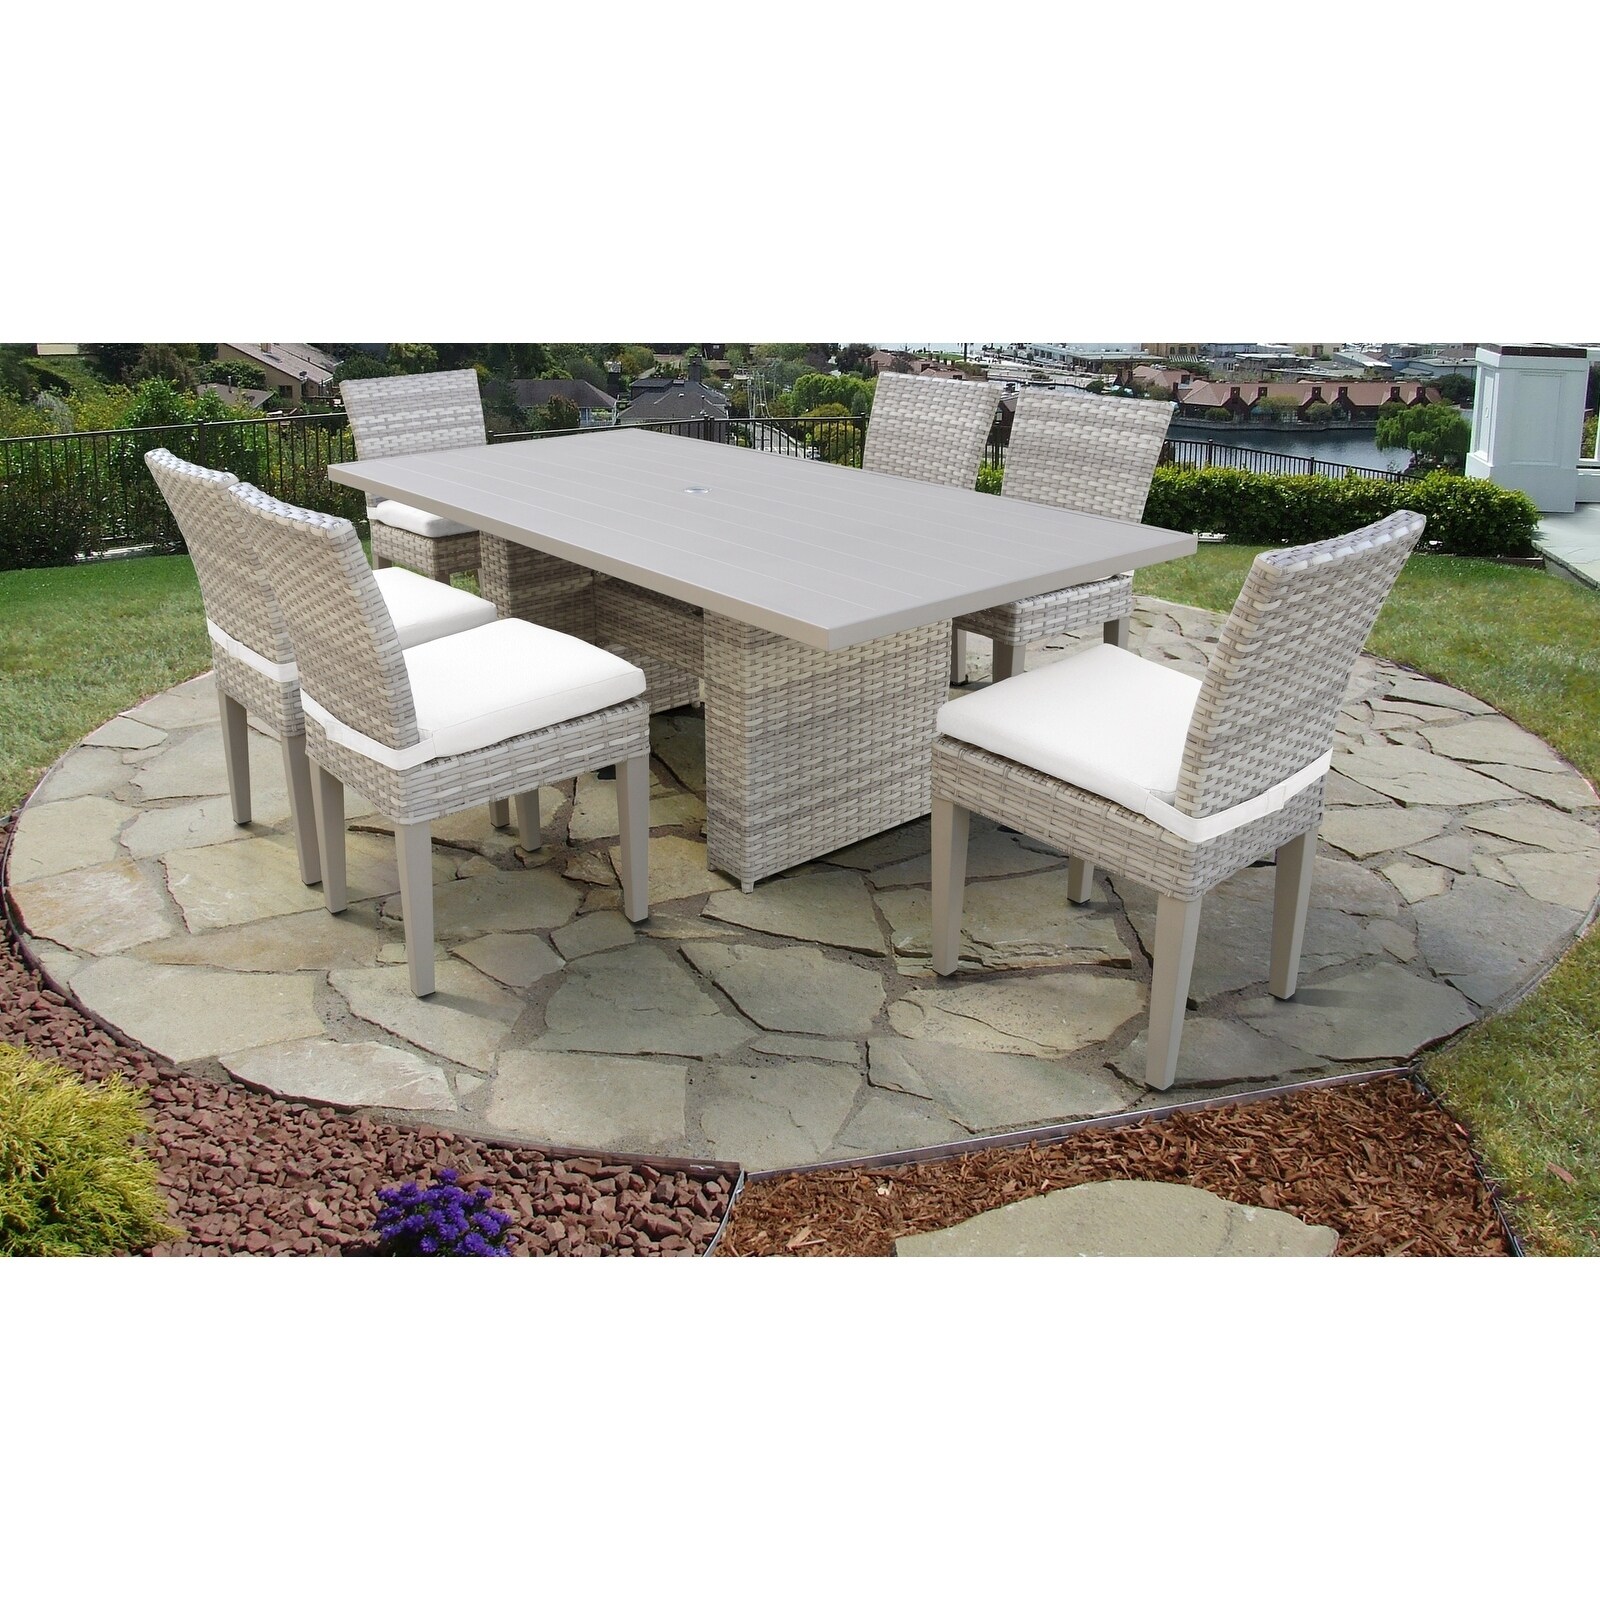 Fairmont Rectangular Outdoor Patio Dining Table With 6 Armless Chairs